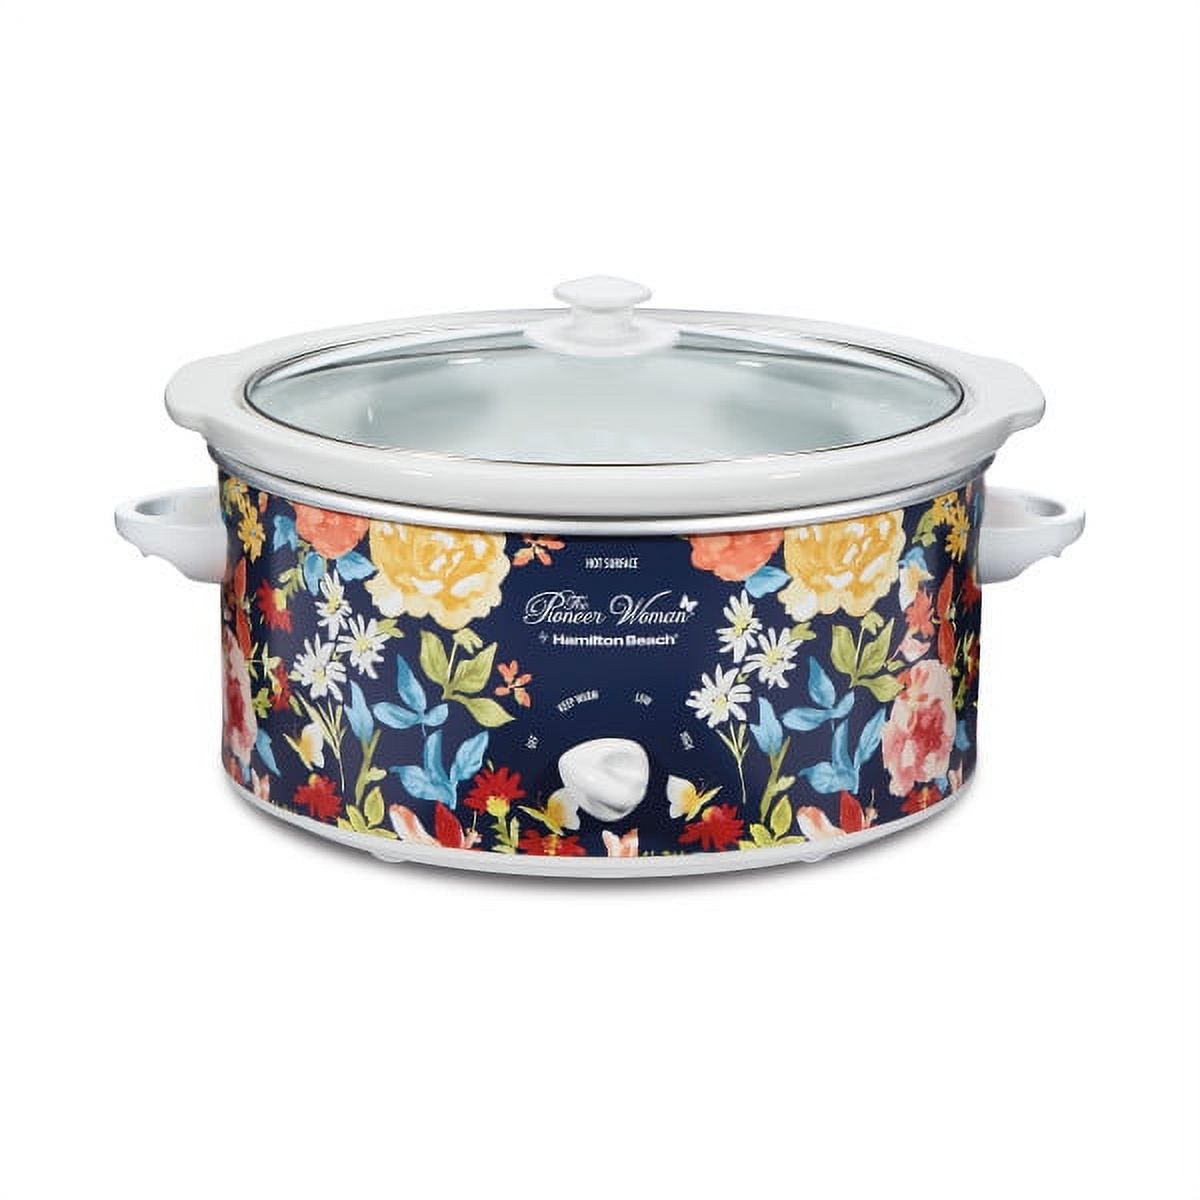 The Pioneer Woman Fiona Floral 5-Quart Portable Slow Cooker - image 1 of 6